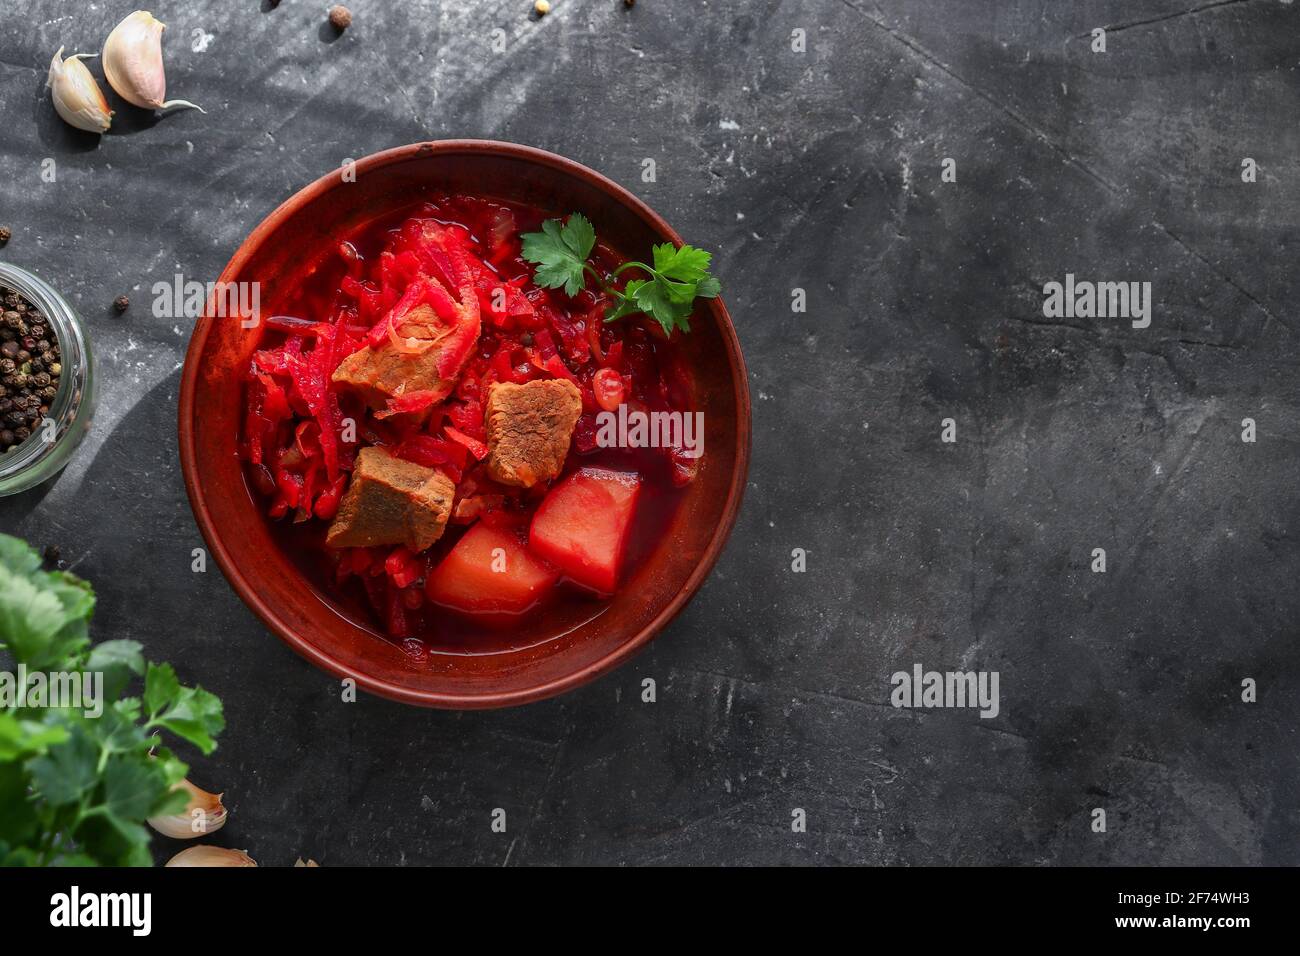 Red borsch with vegetables and meat in a clay plate. Steam from hot tomato soup. Dark background. Delicious healthy lunch. Top view. Copyspace Stock Photo